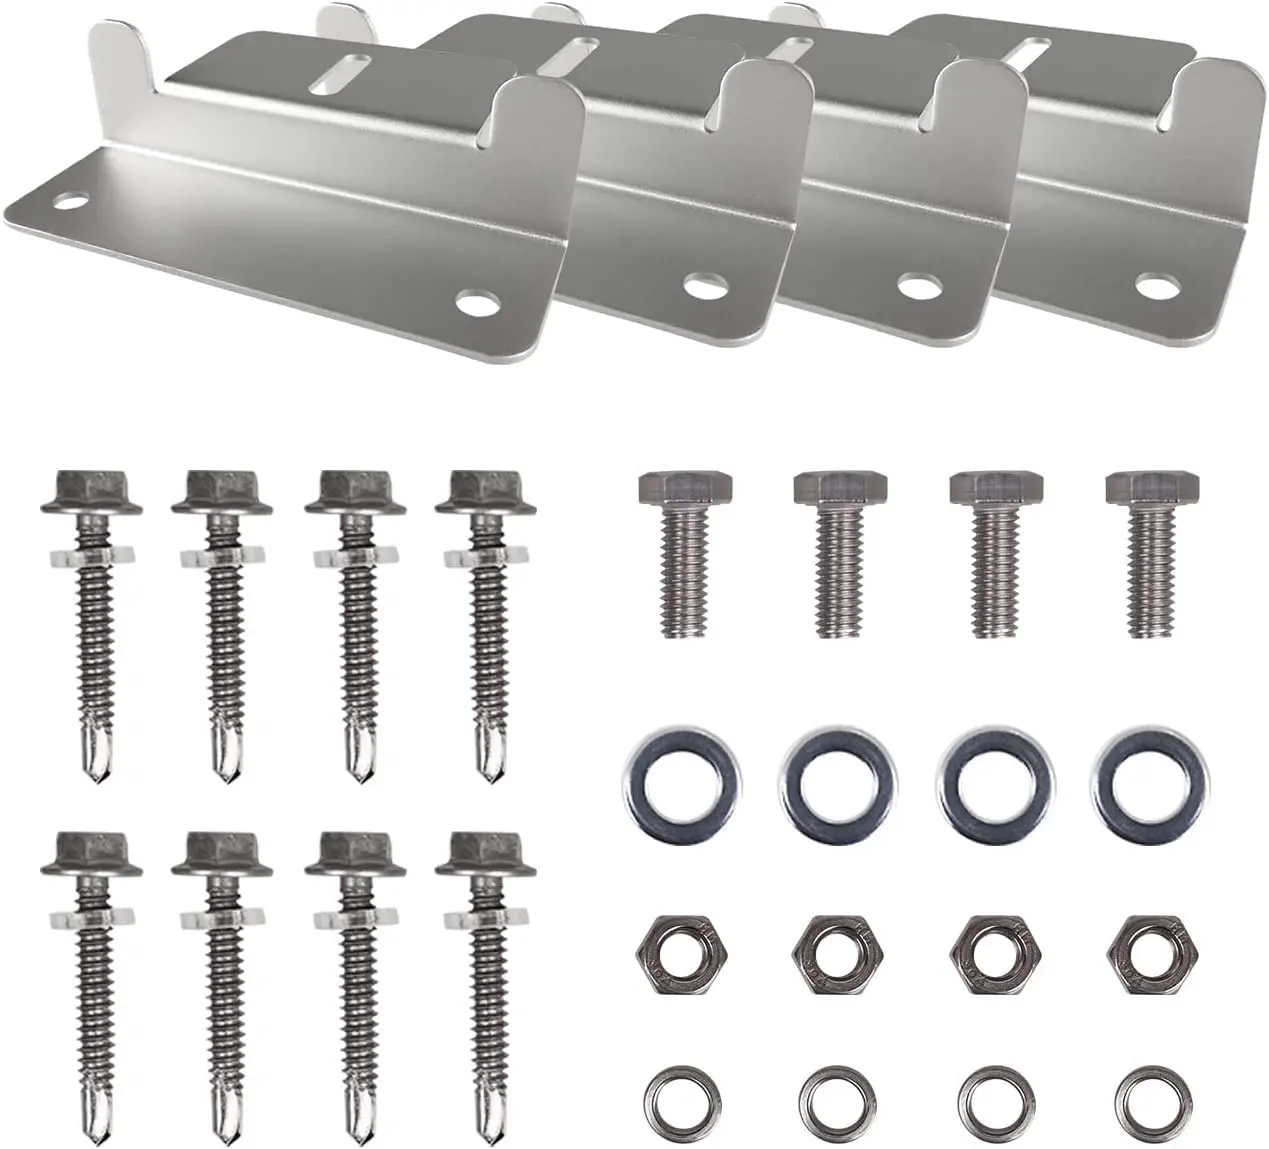 fasteners for solar panels - What screws are best for solar panels